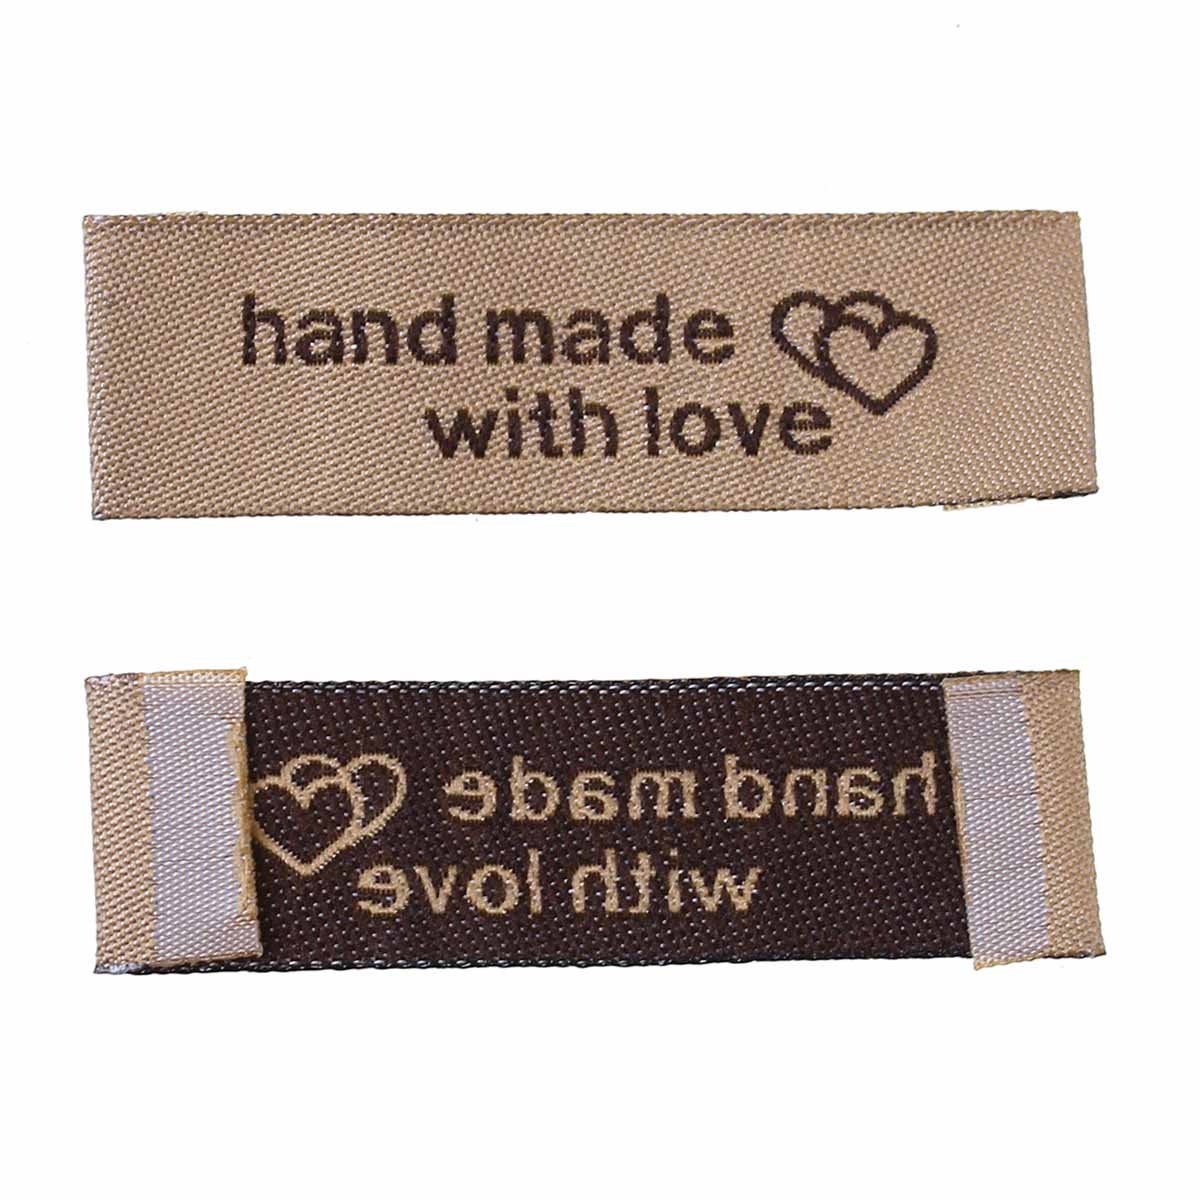 10 Brown woven printed sewing labels - different styles for choice